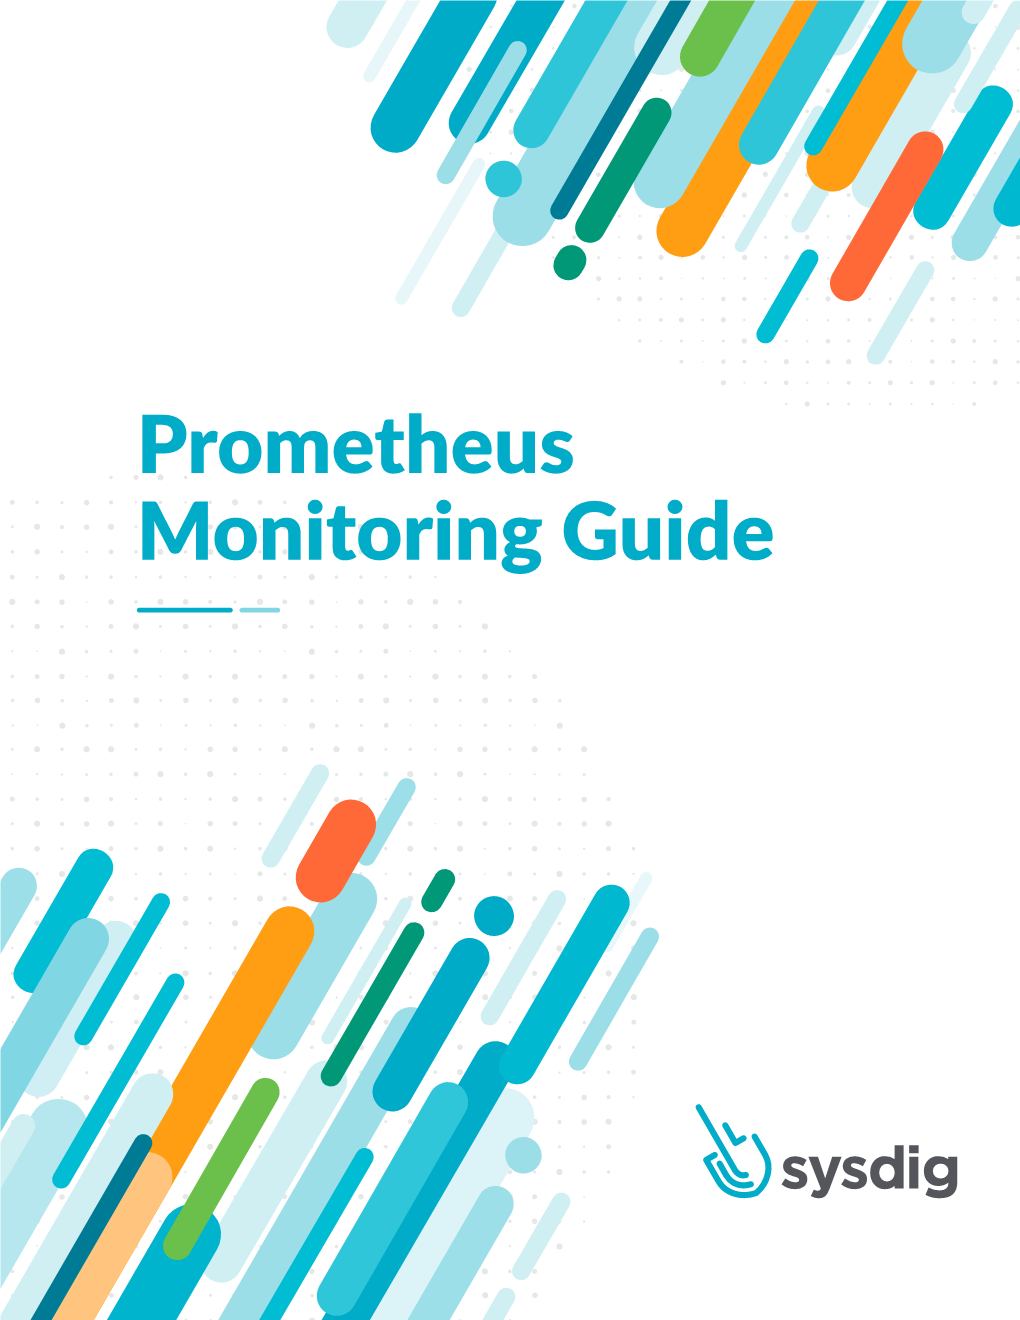 Prometheus Monitoring Guide Contents